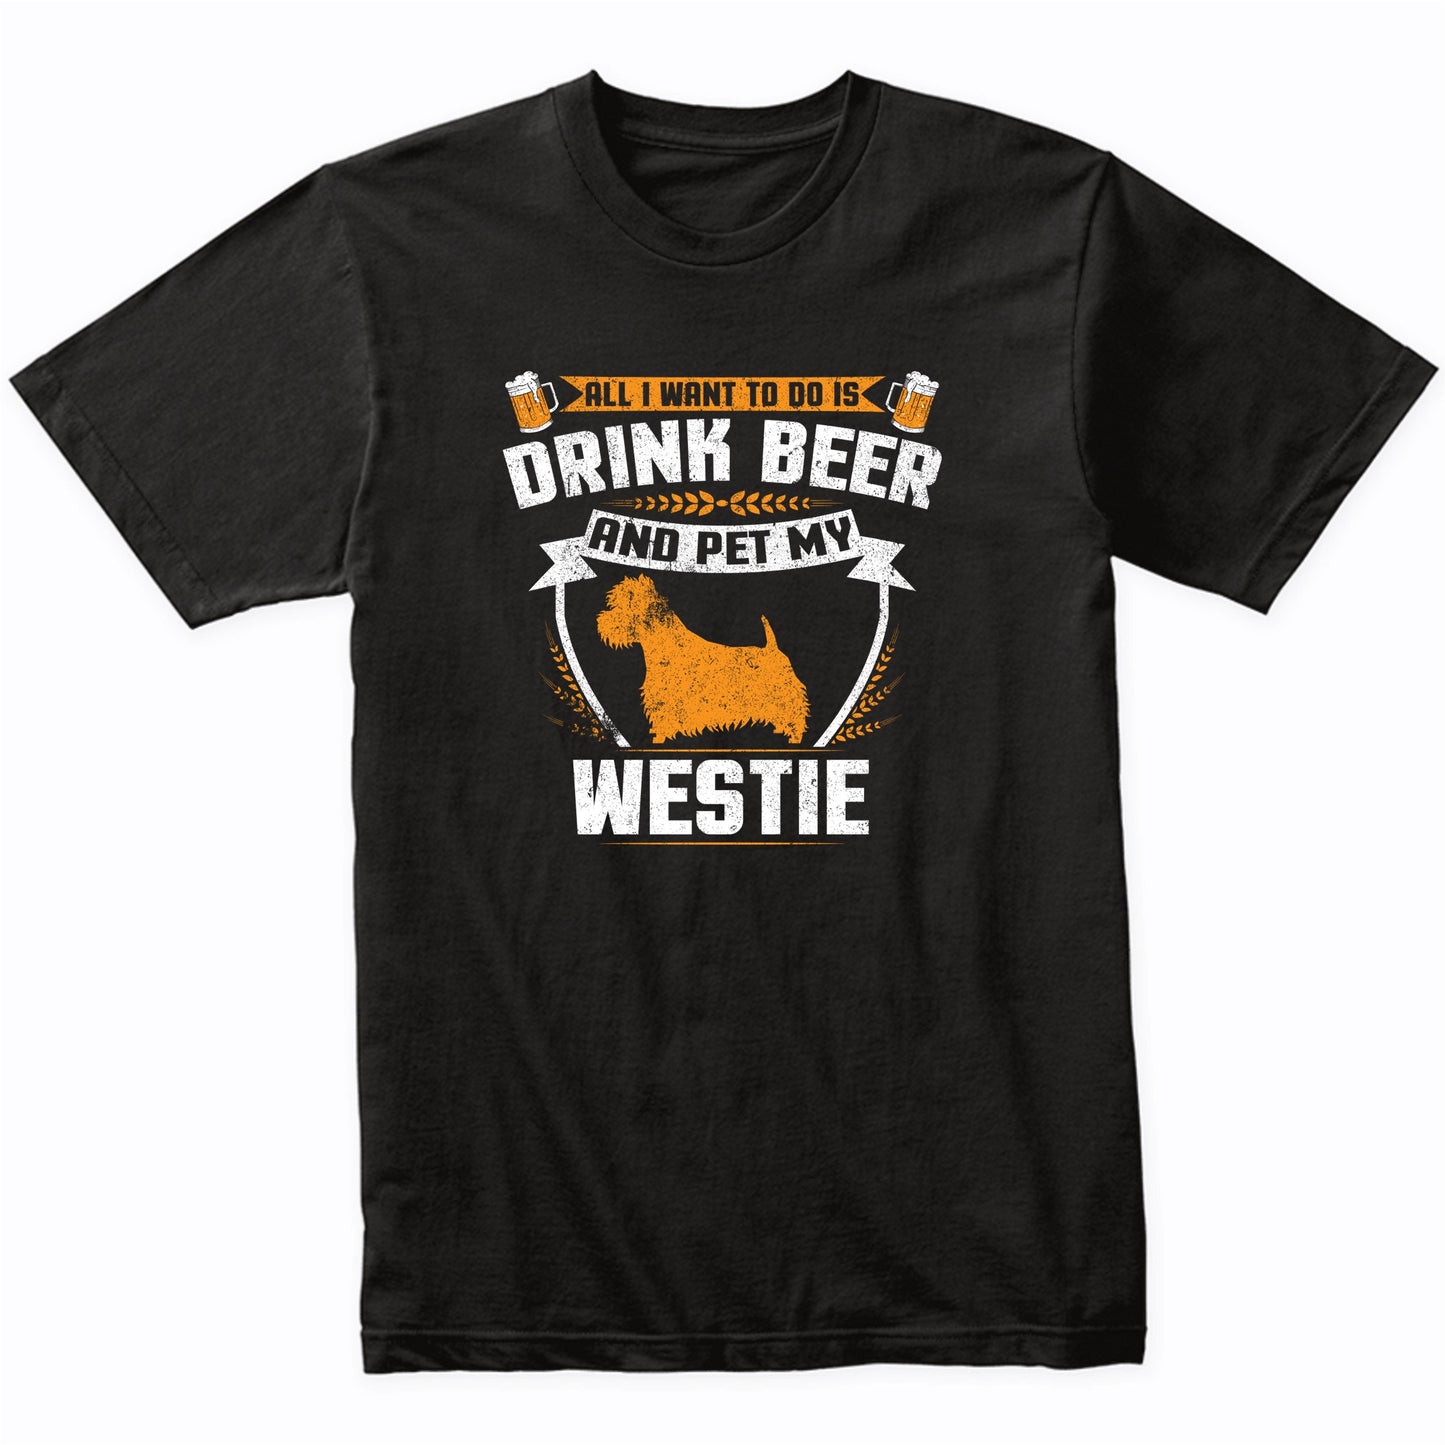 All I Want To Do Is Drink Beer And Pet My Westie Funny Dog Owner Shirt